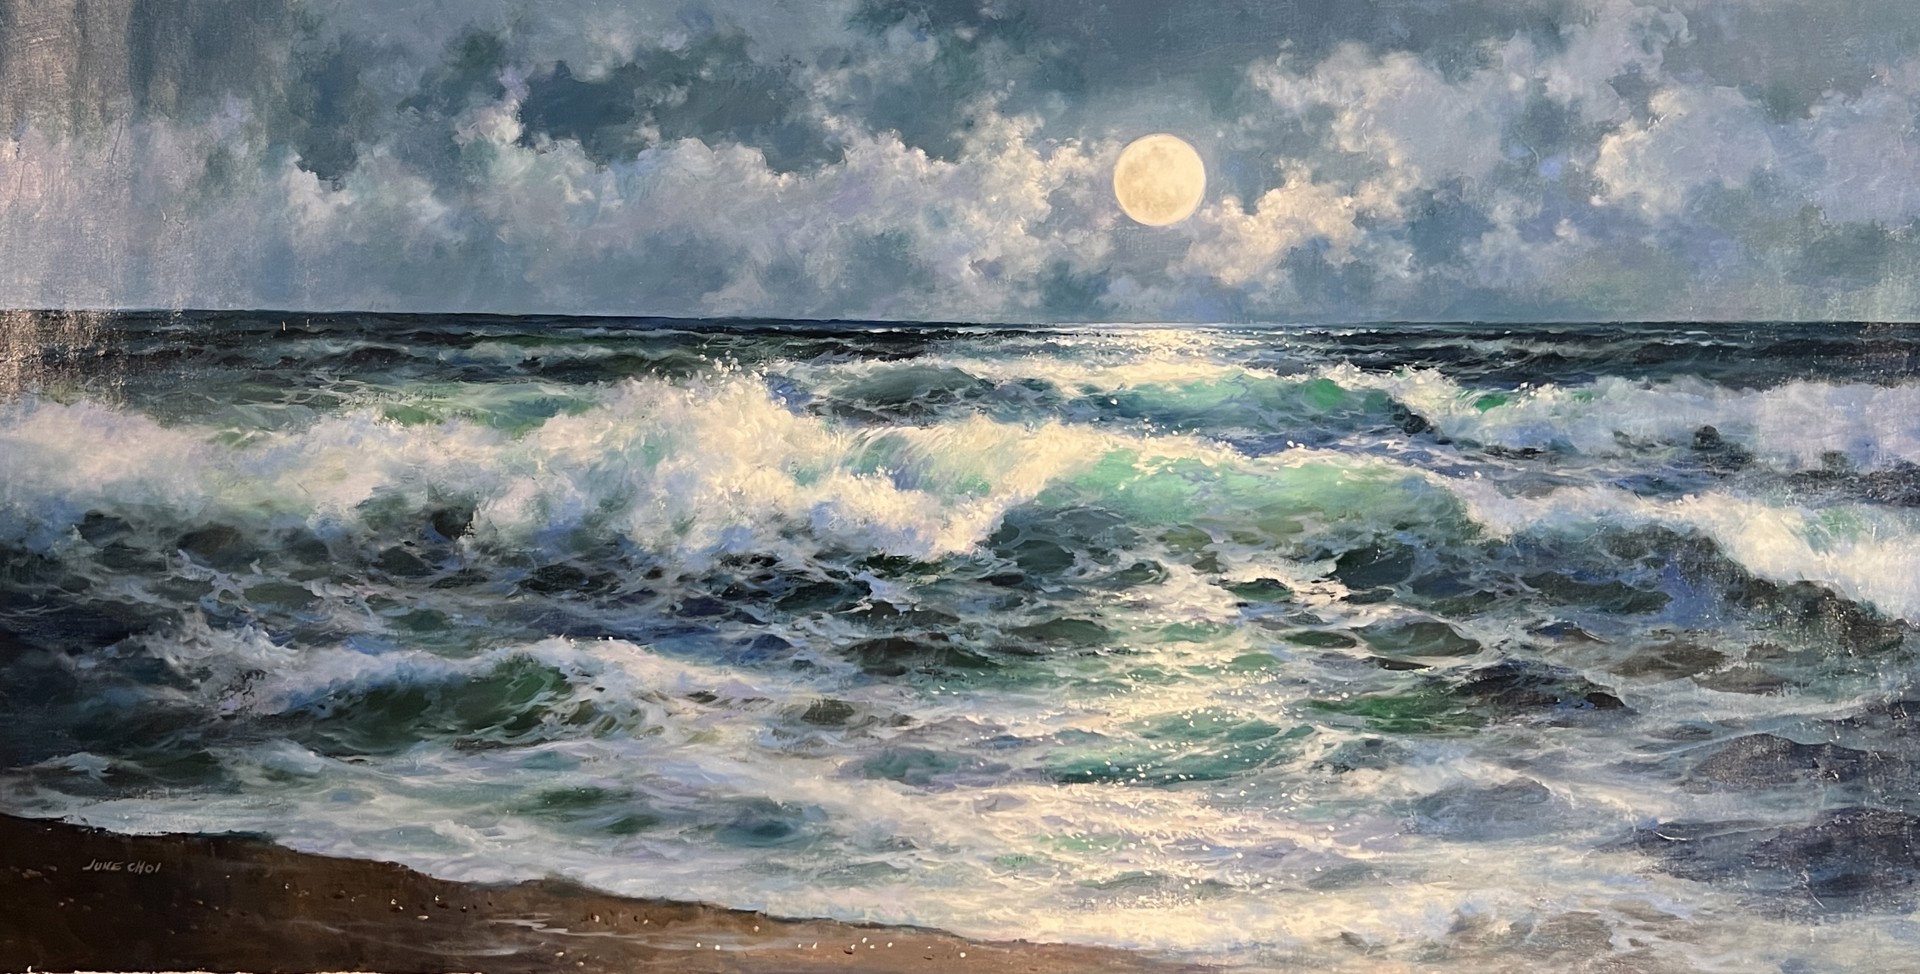 NIGHT WAVES by JUNE CHOI